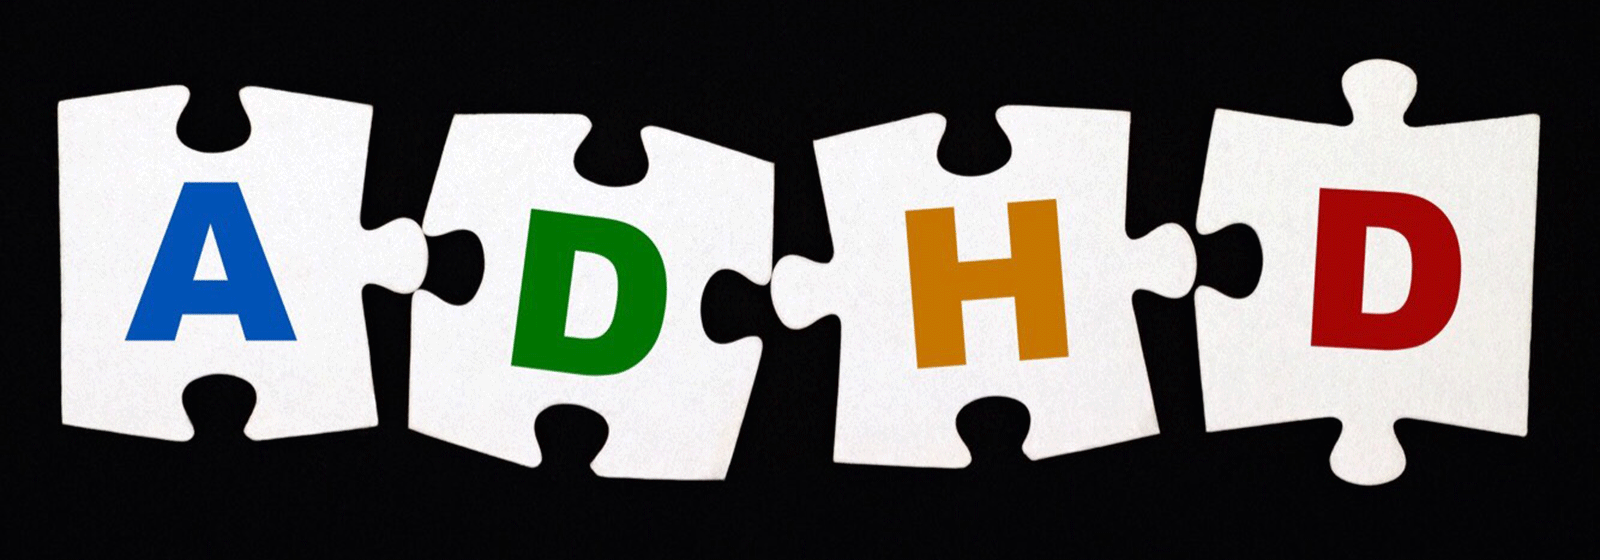 Graphic depicting four puzzles pieces with the letters A, D, H and D on them